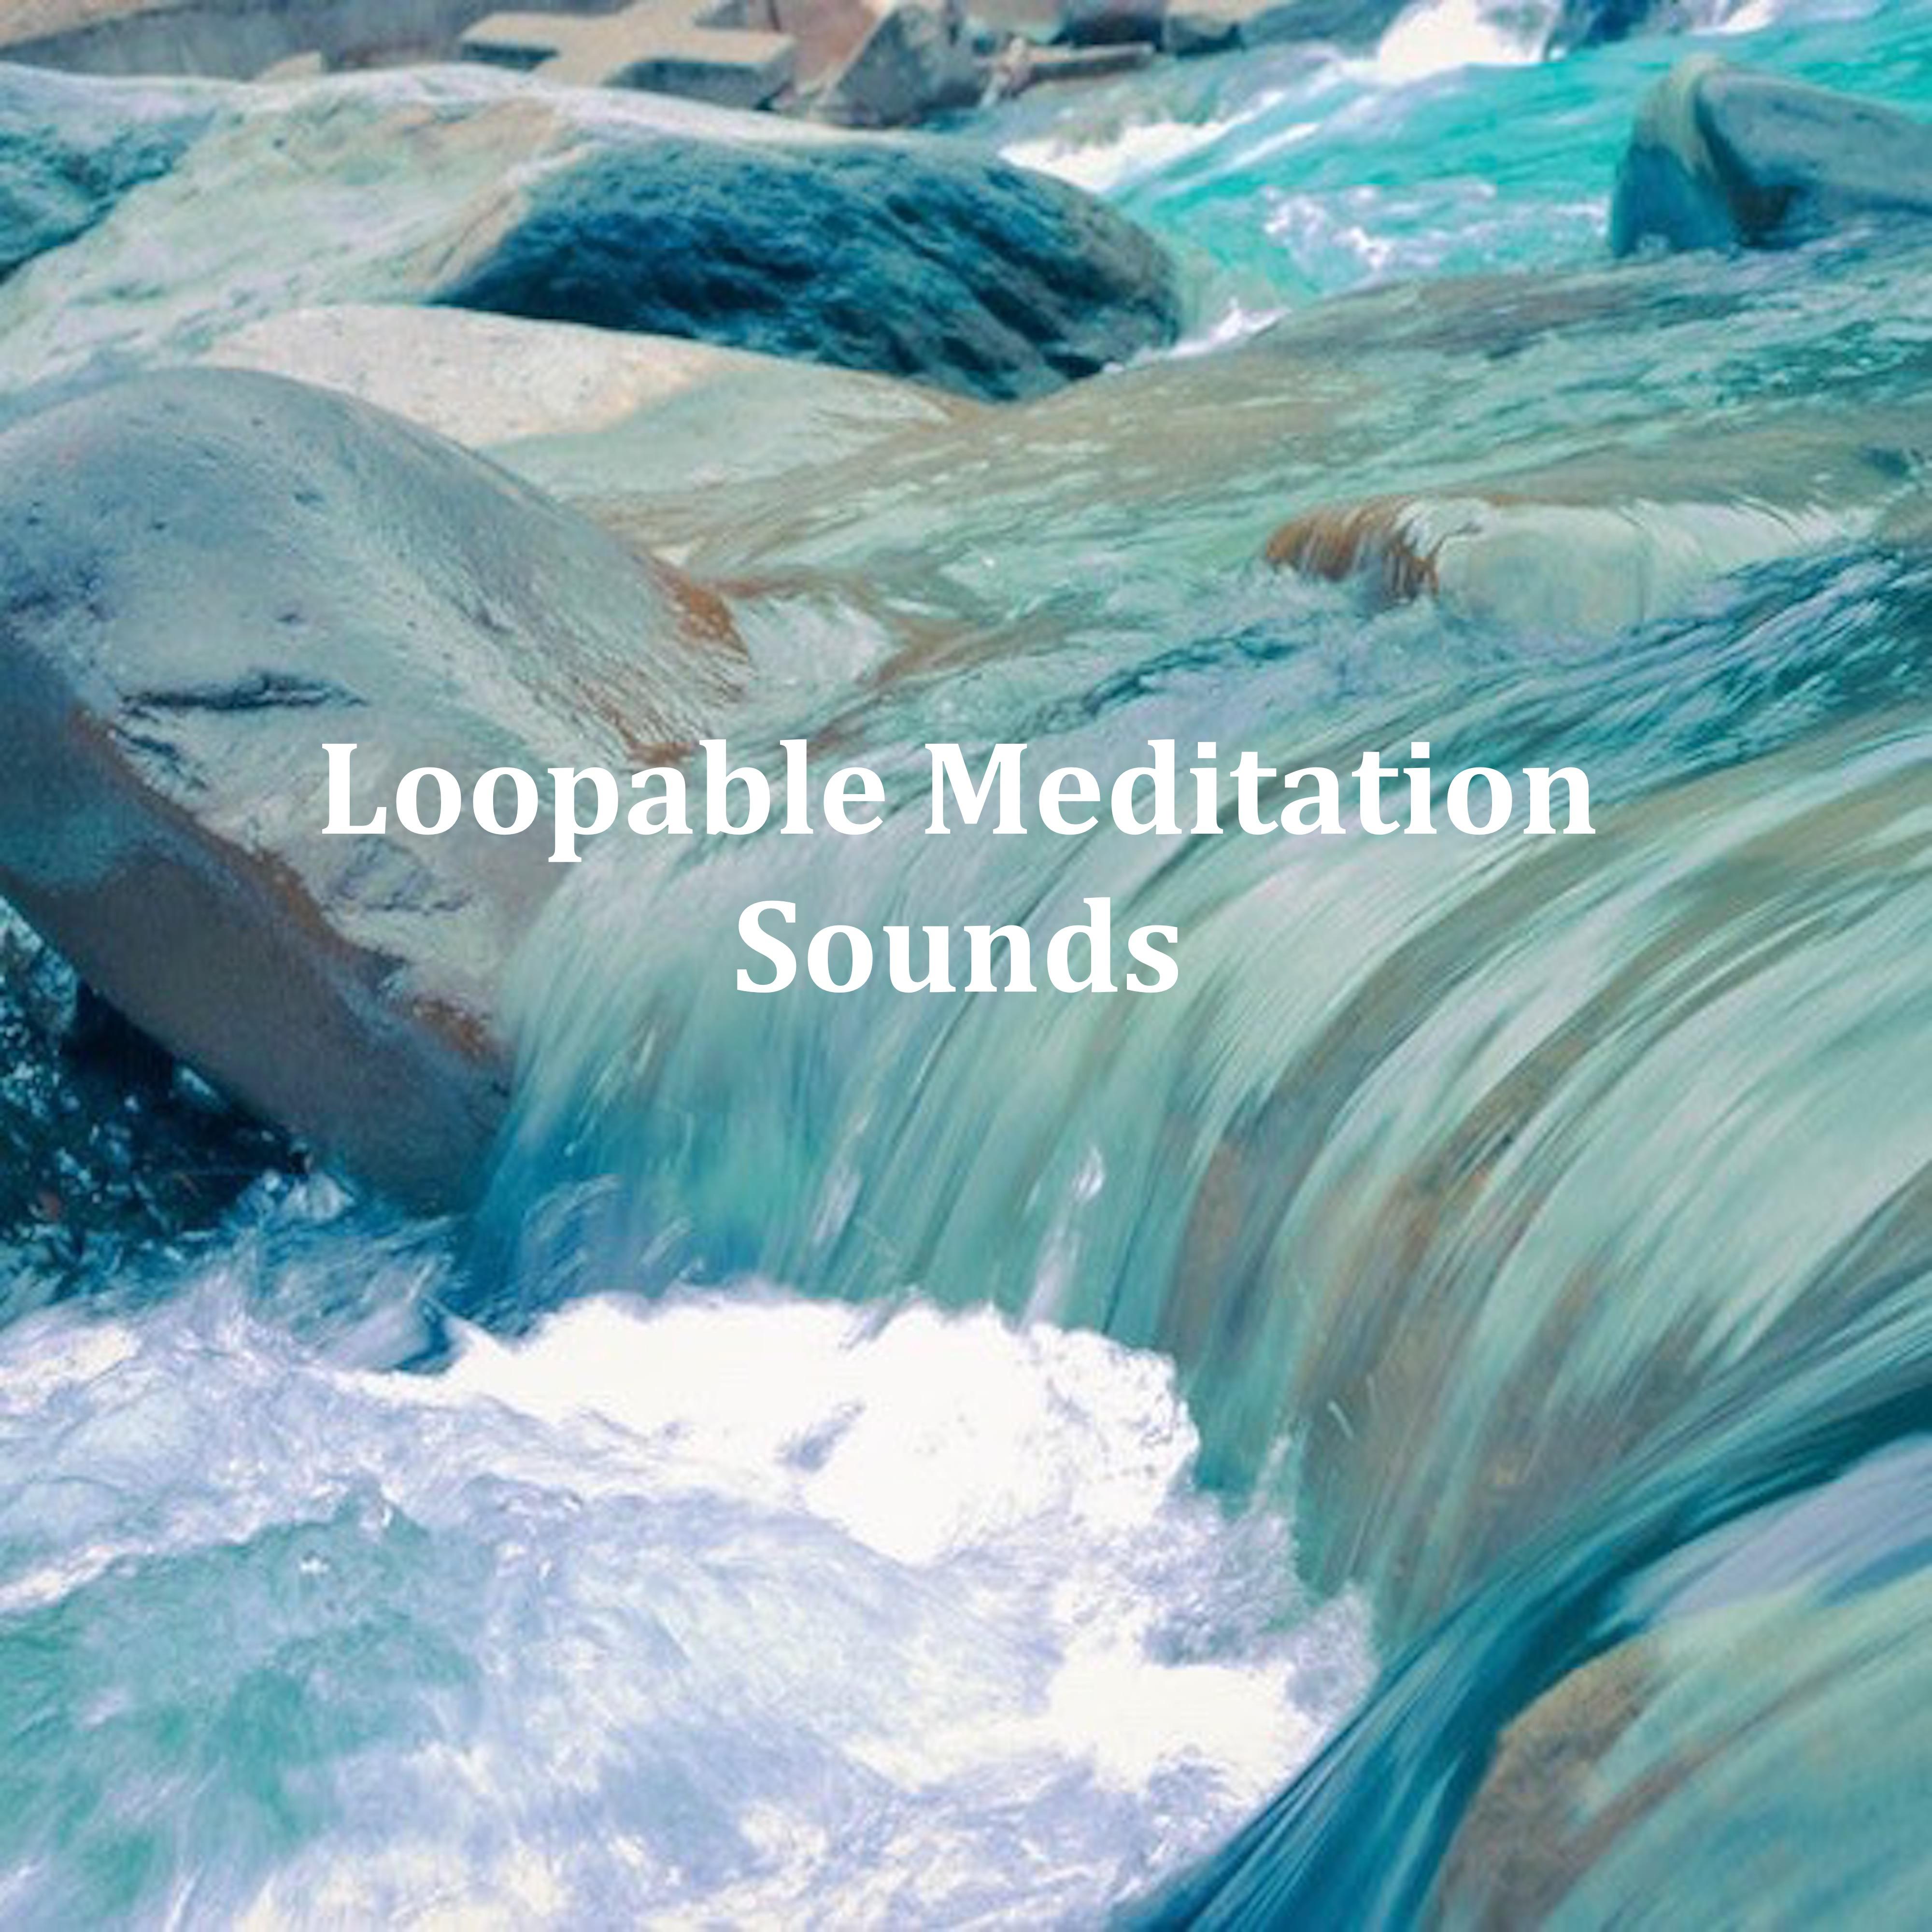 17 Meditation and Spa Nature Sounds, Loopable Compilation of Storm and Rain Sounds